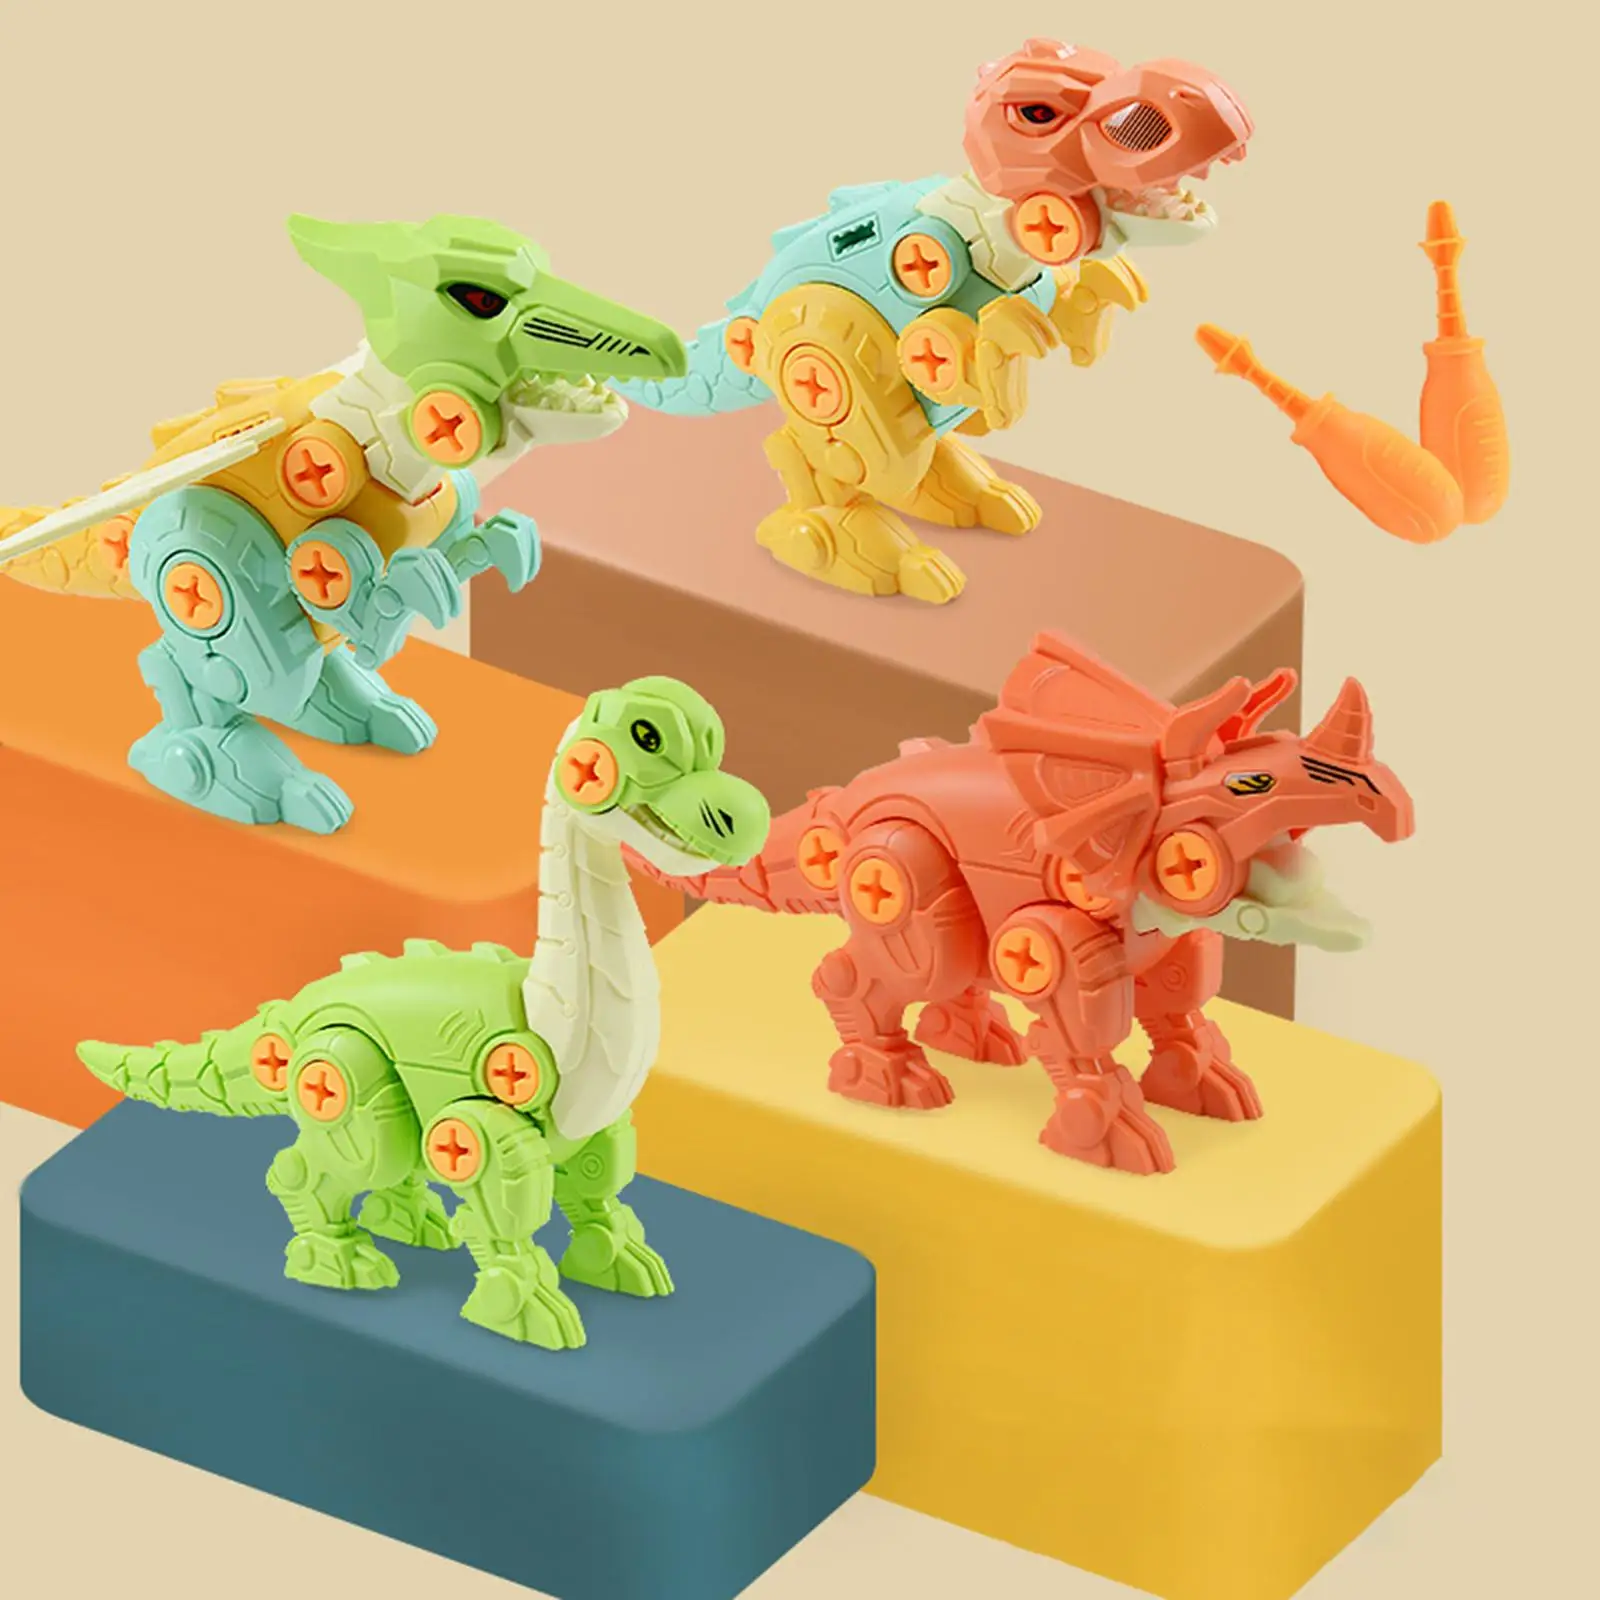 4 Pieces DIY Assembly Dinosaur Toys Set Construction Toy with Screwdriver Educational Toy Christmas Gifts for Kids Children Boys